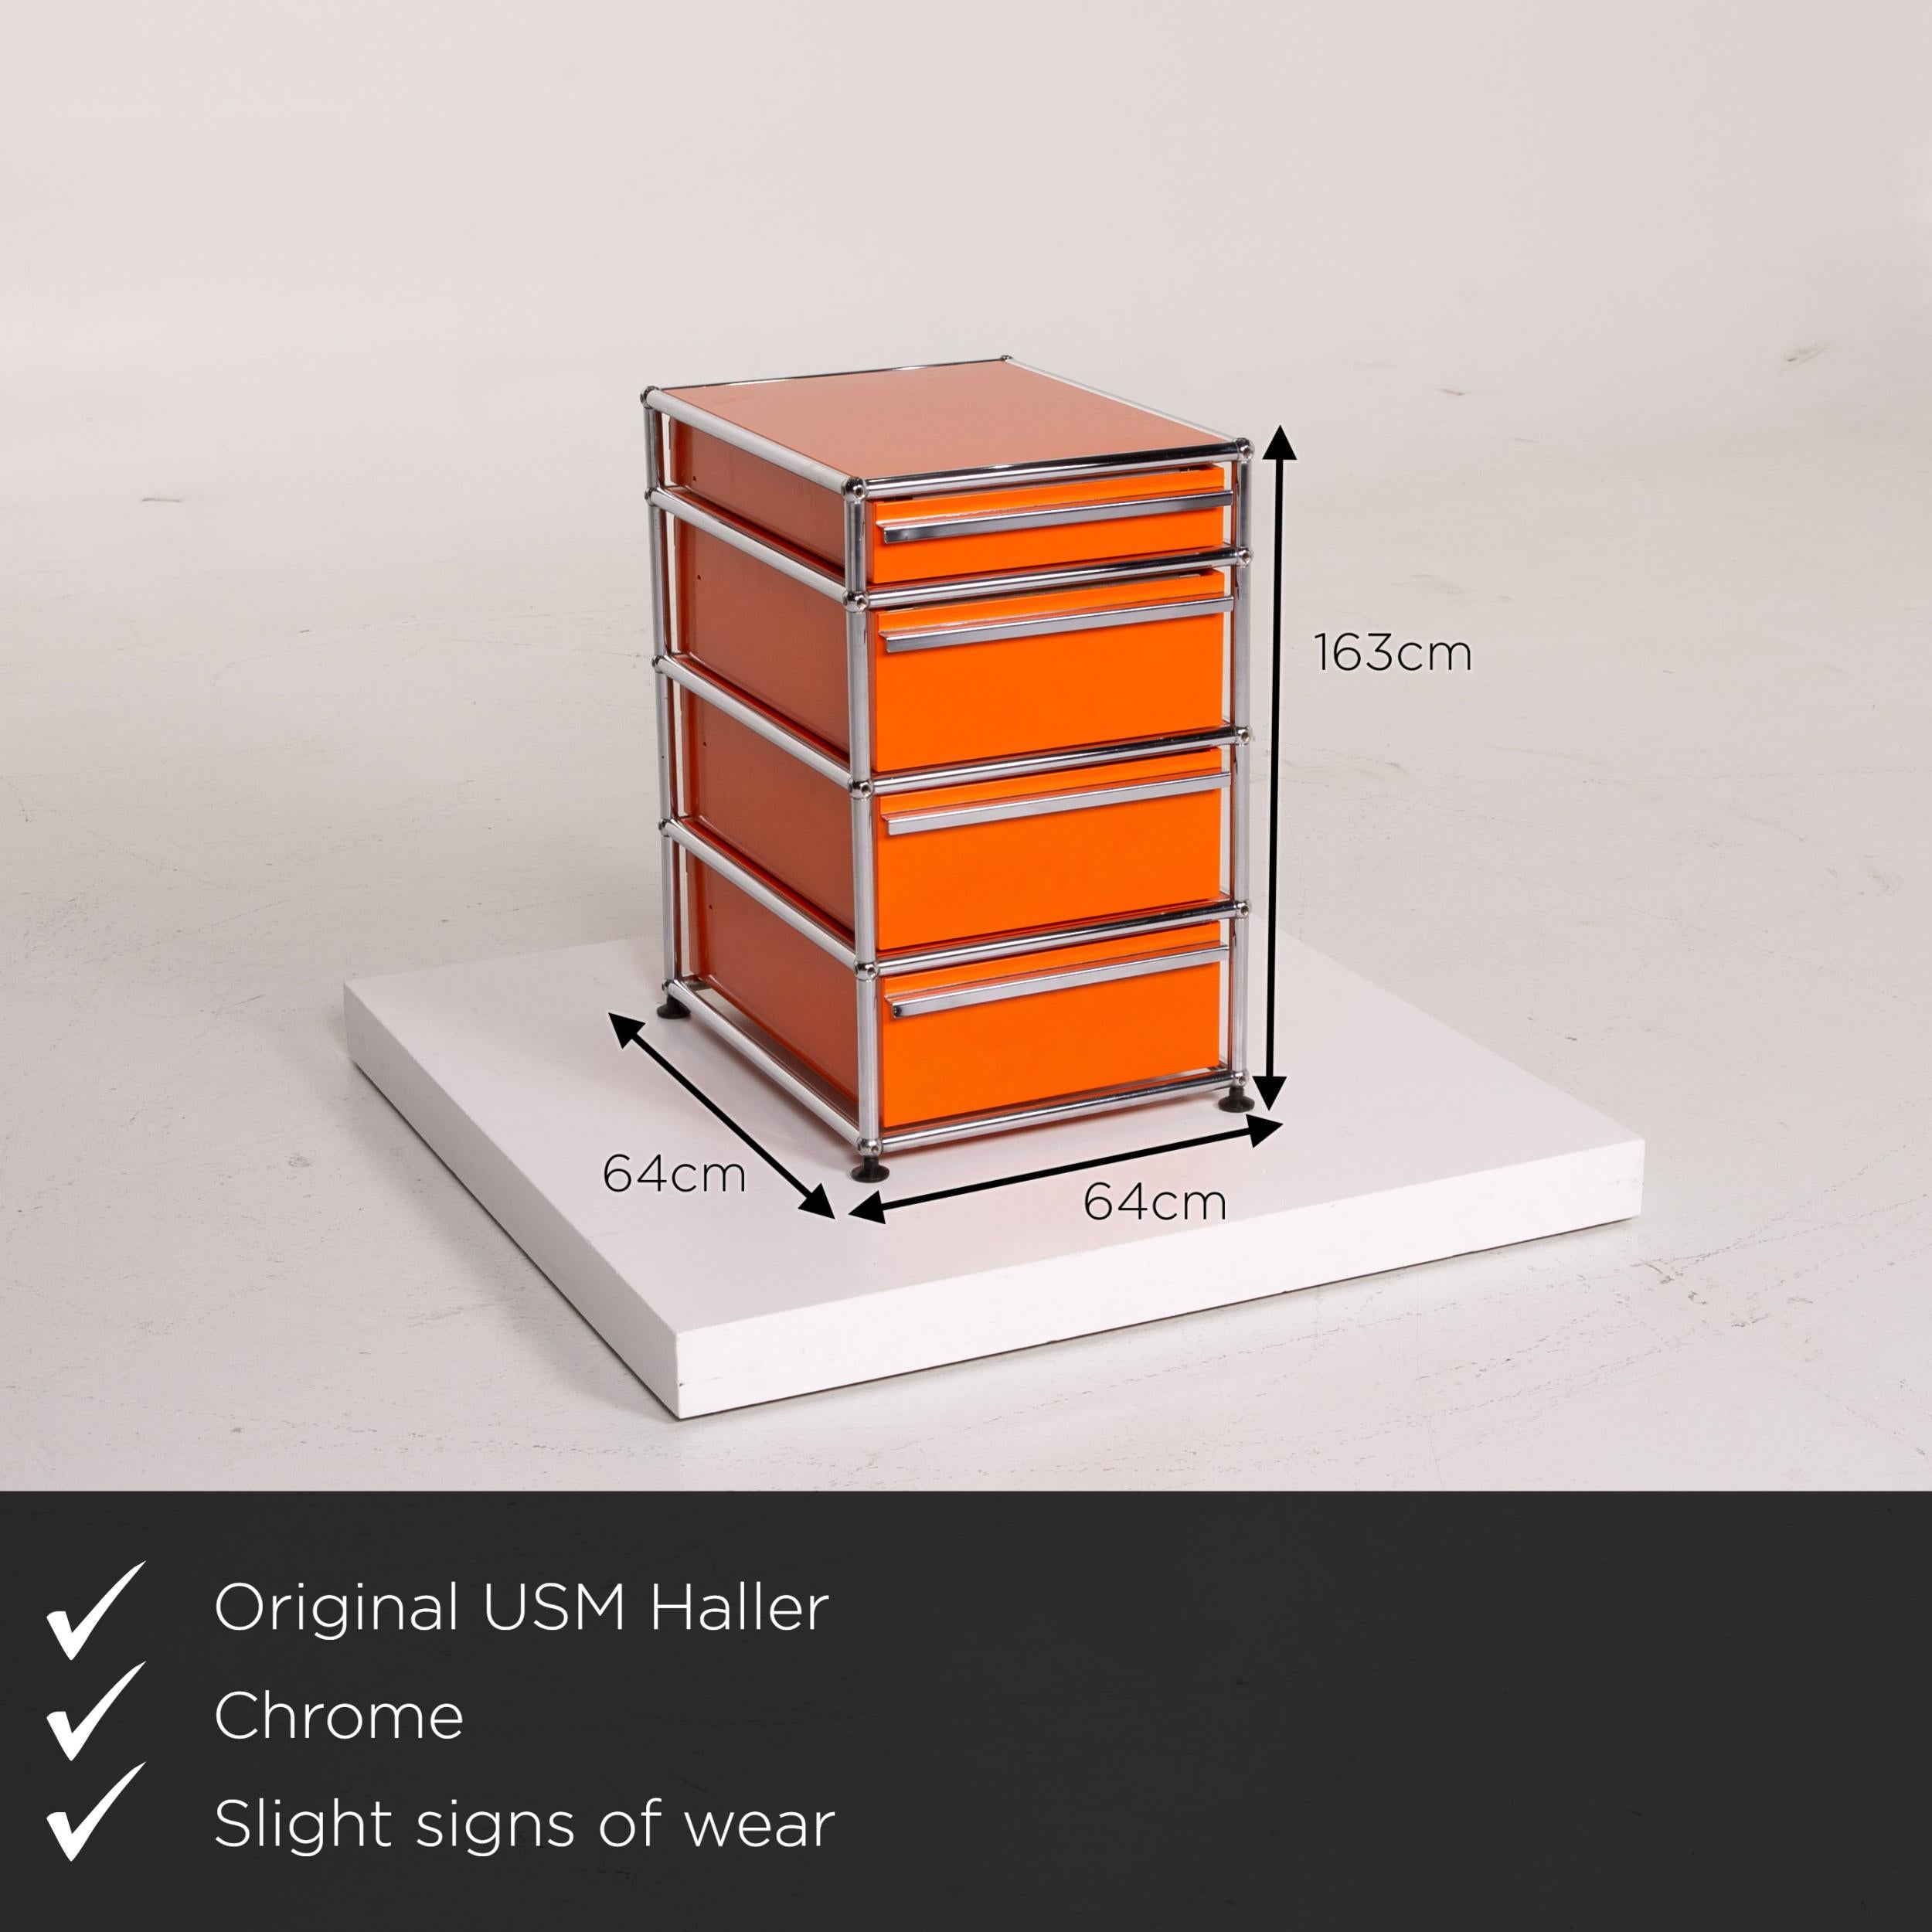 We present to you an USM Haller metal sideboard set orange container chrome office.


 Product measurements in centimeters:
 

 Depth 64
 Width 54
 Height 163.





 